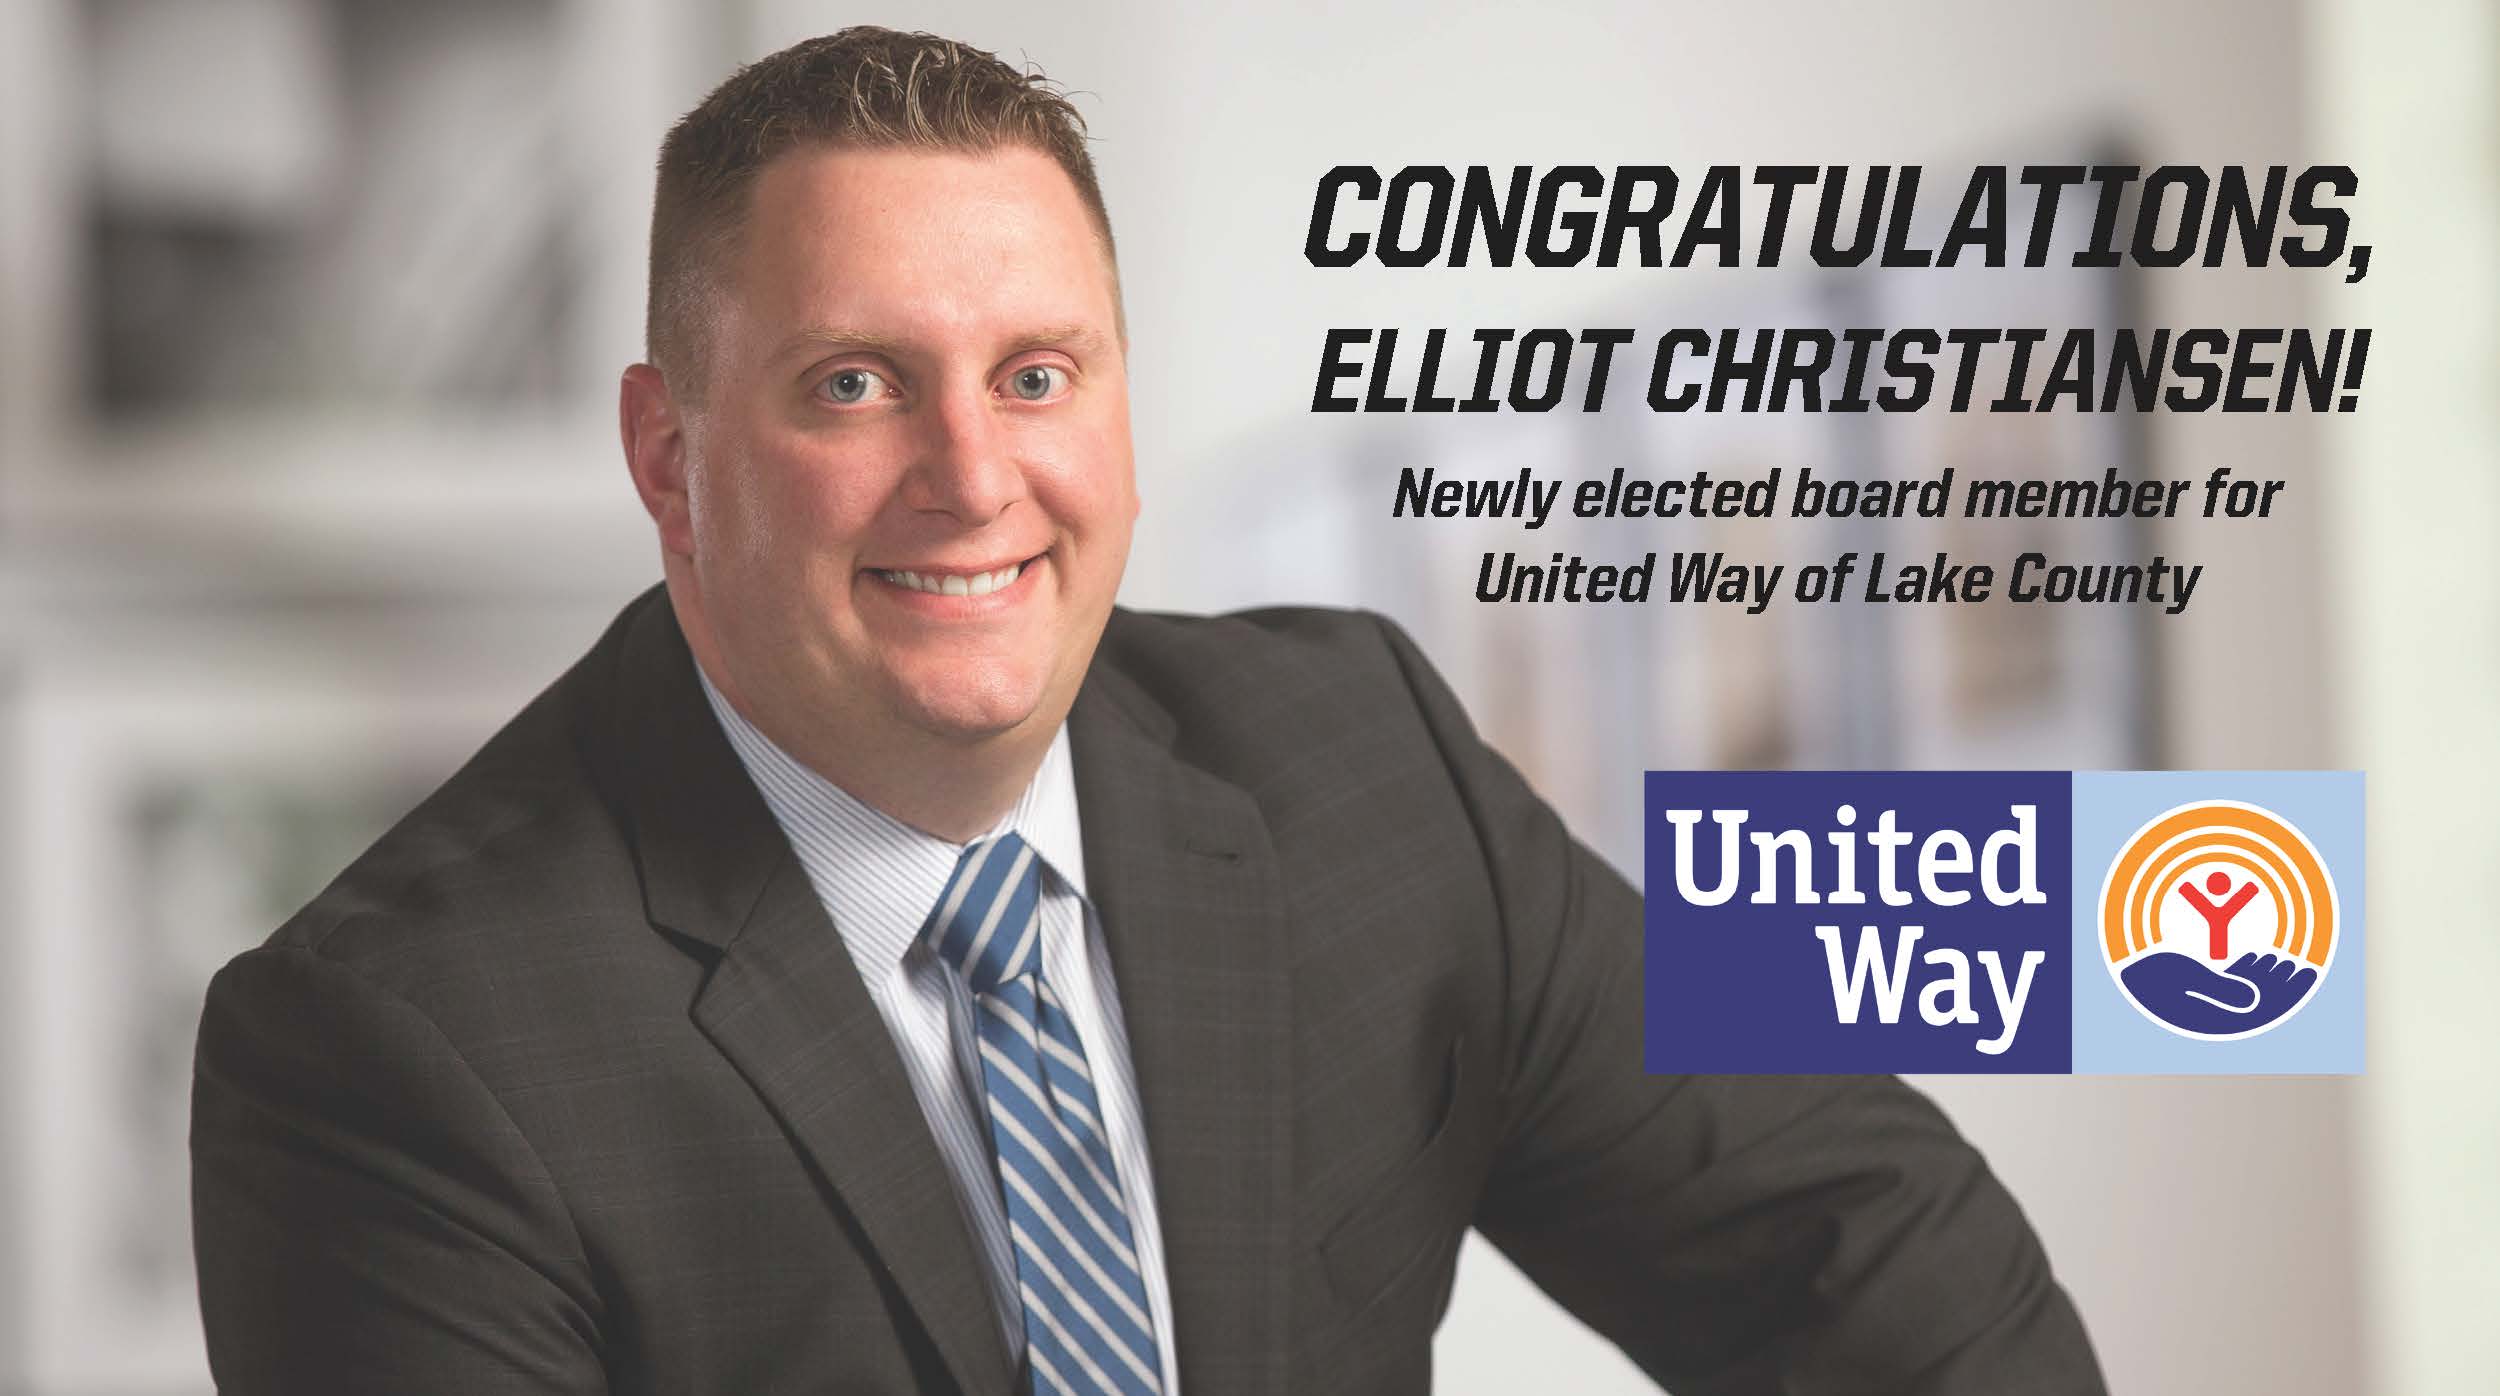 Elliot Christiansen Elected to Board of United Way of Lake County